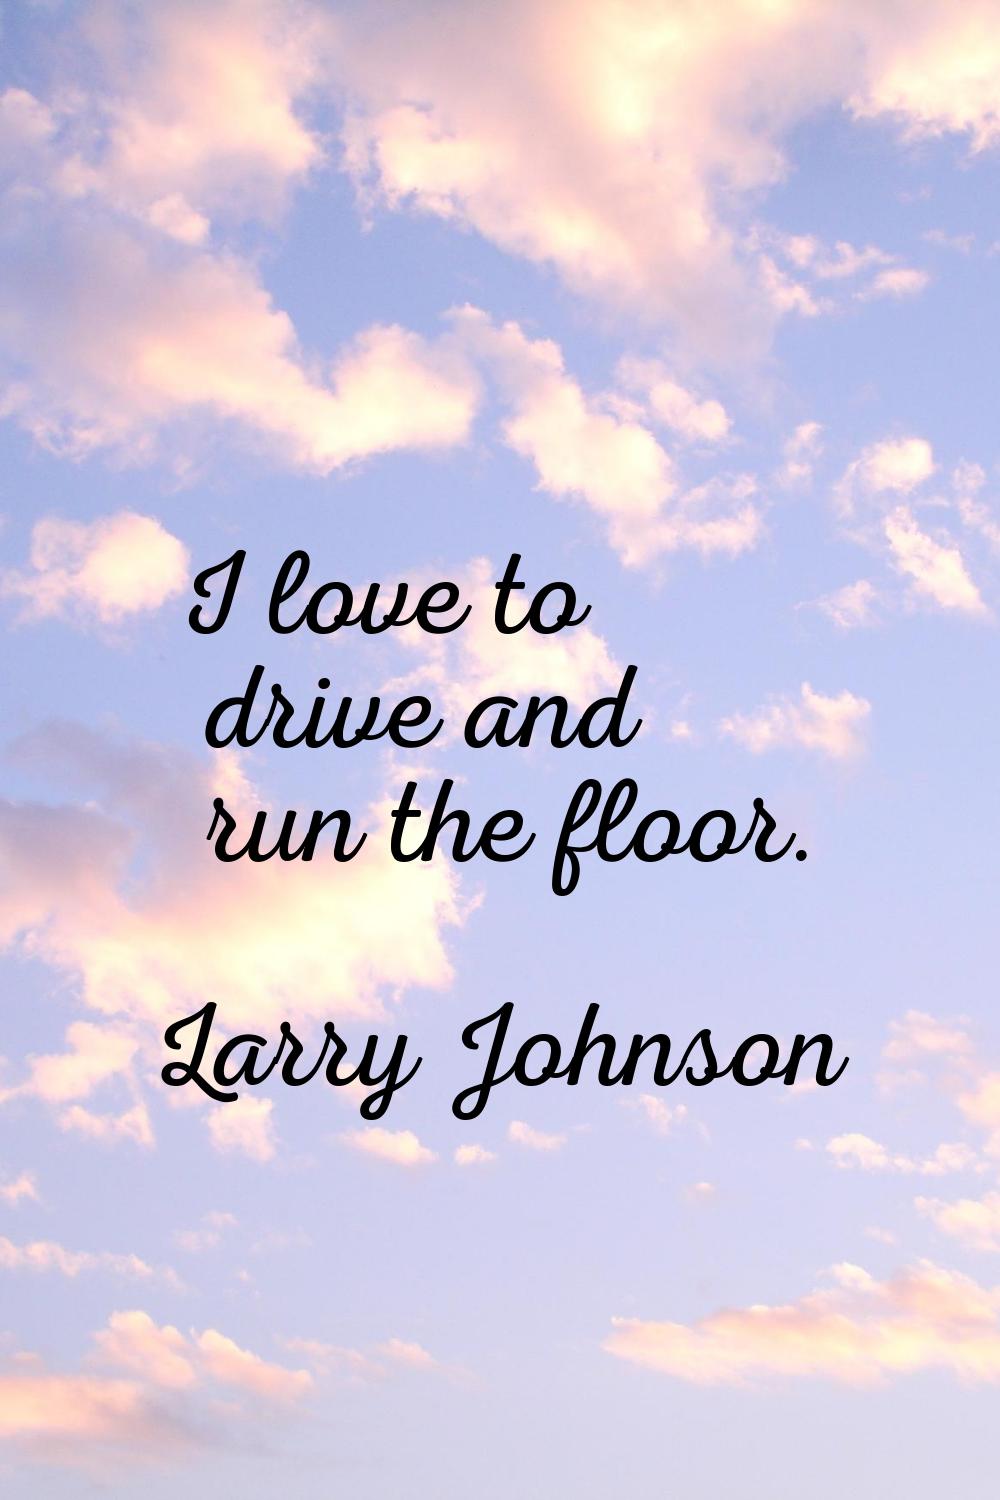 I love to drive and run the floor.